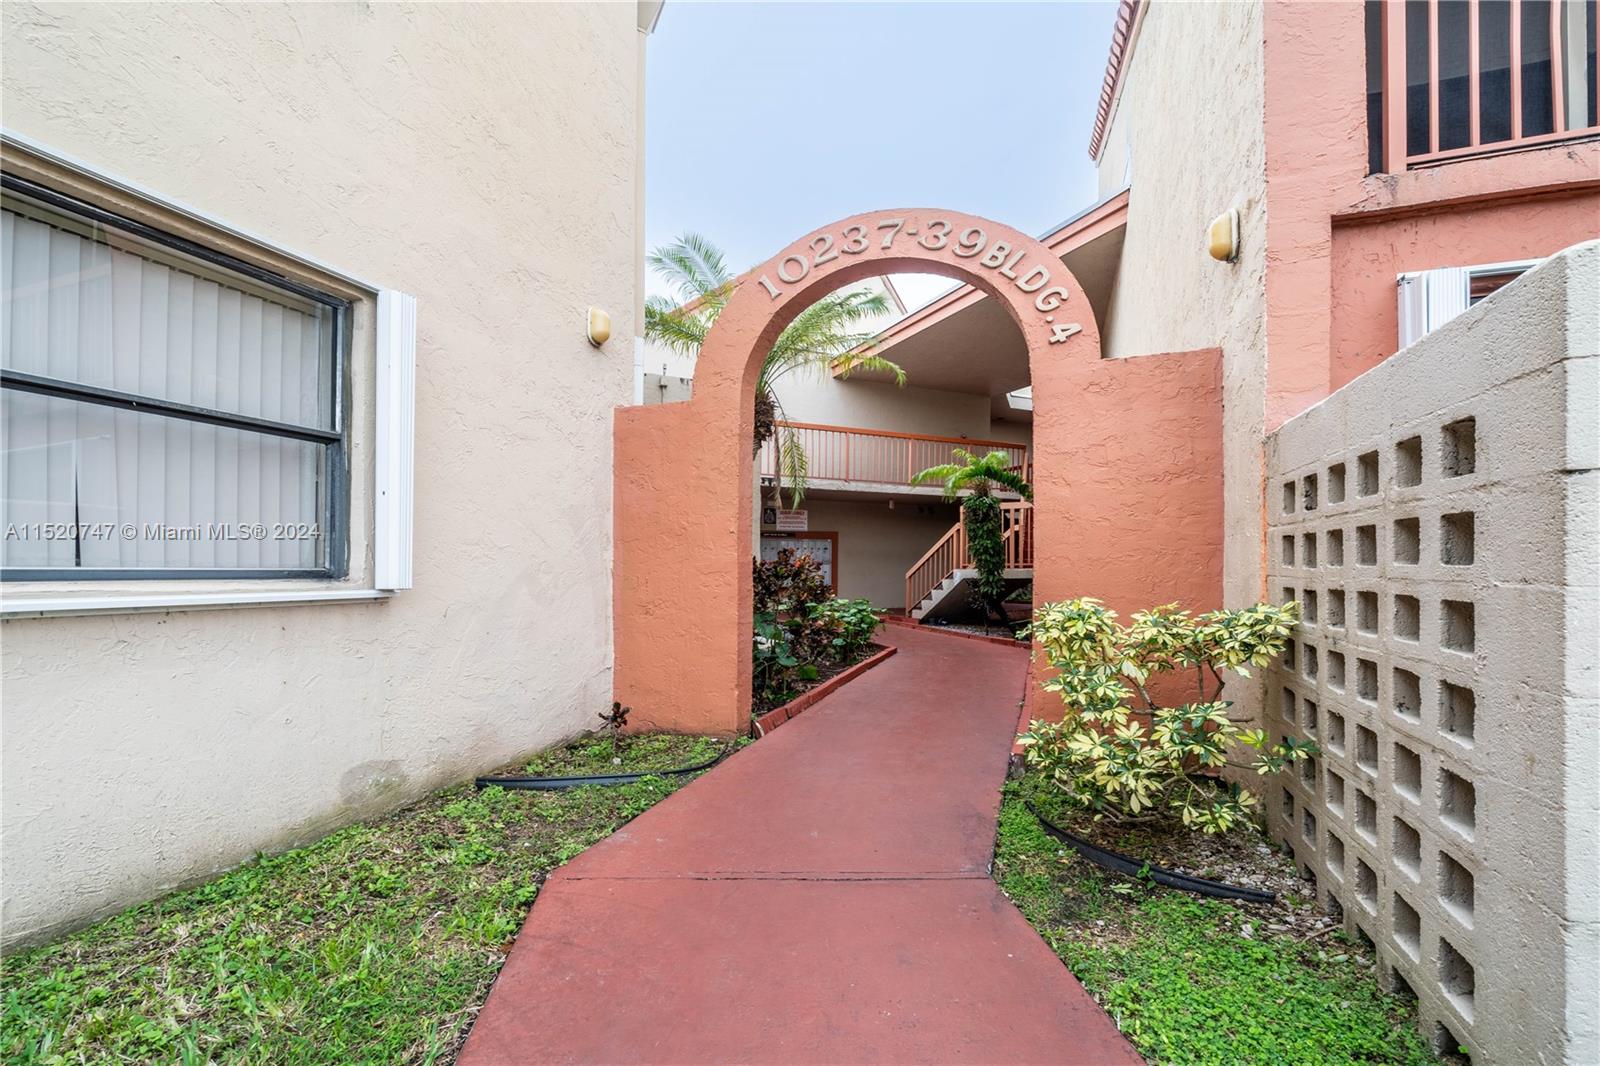 10237 NW 9th St Cir 102-4, Miami, Florida 33172, 2 Bedrooms Bedrooms, ,2 BathroomsBathrooms,Residentiallease,For Rent,10237 NW 9th St Cir 102-4,A11520747